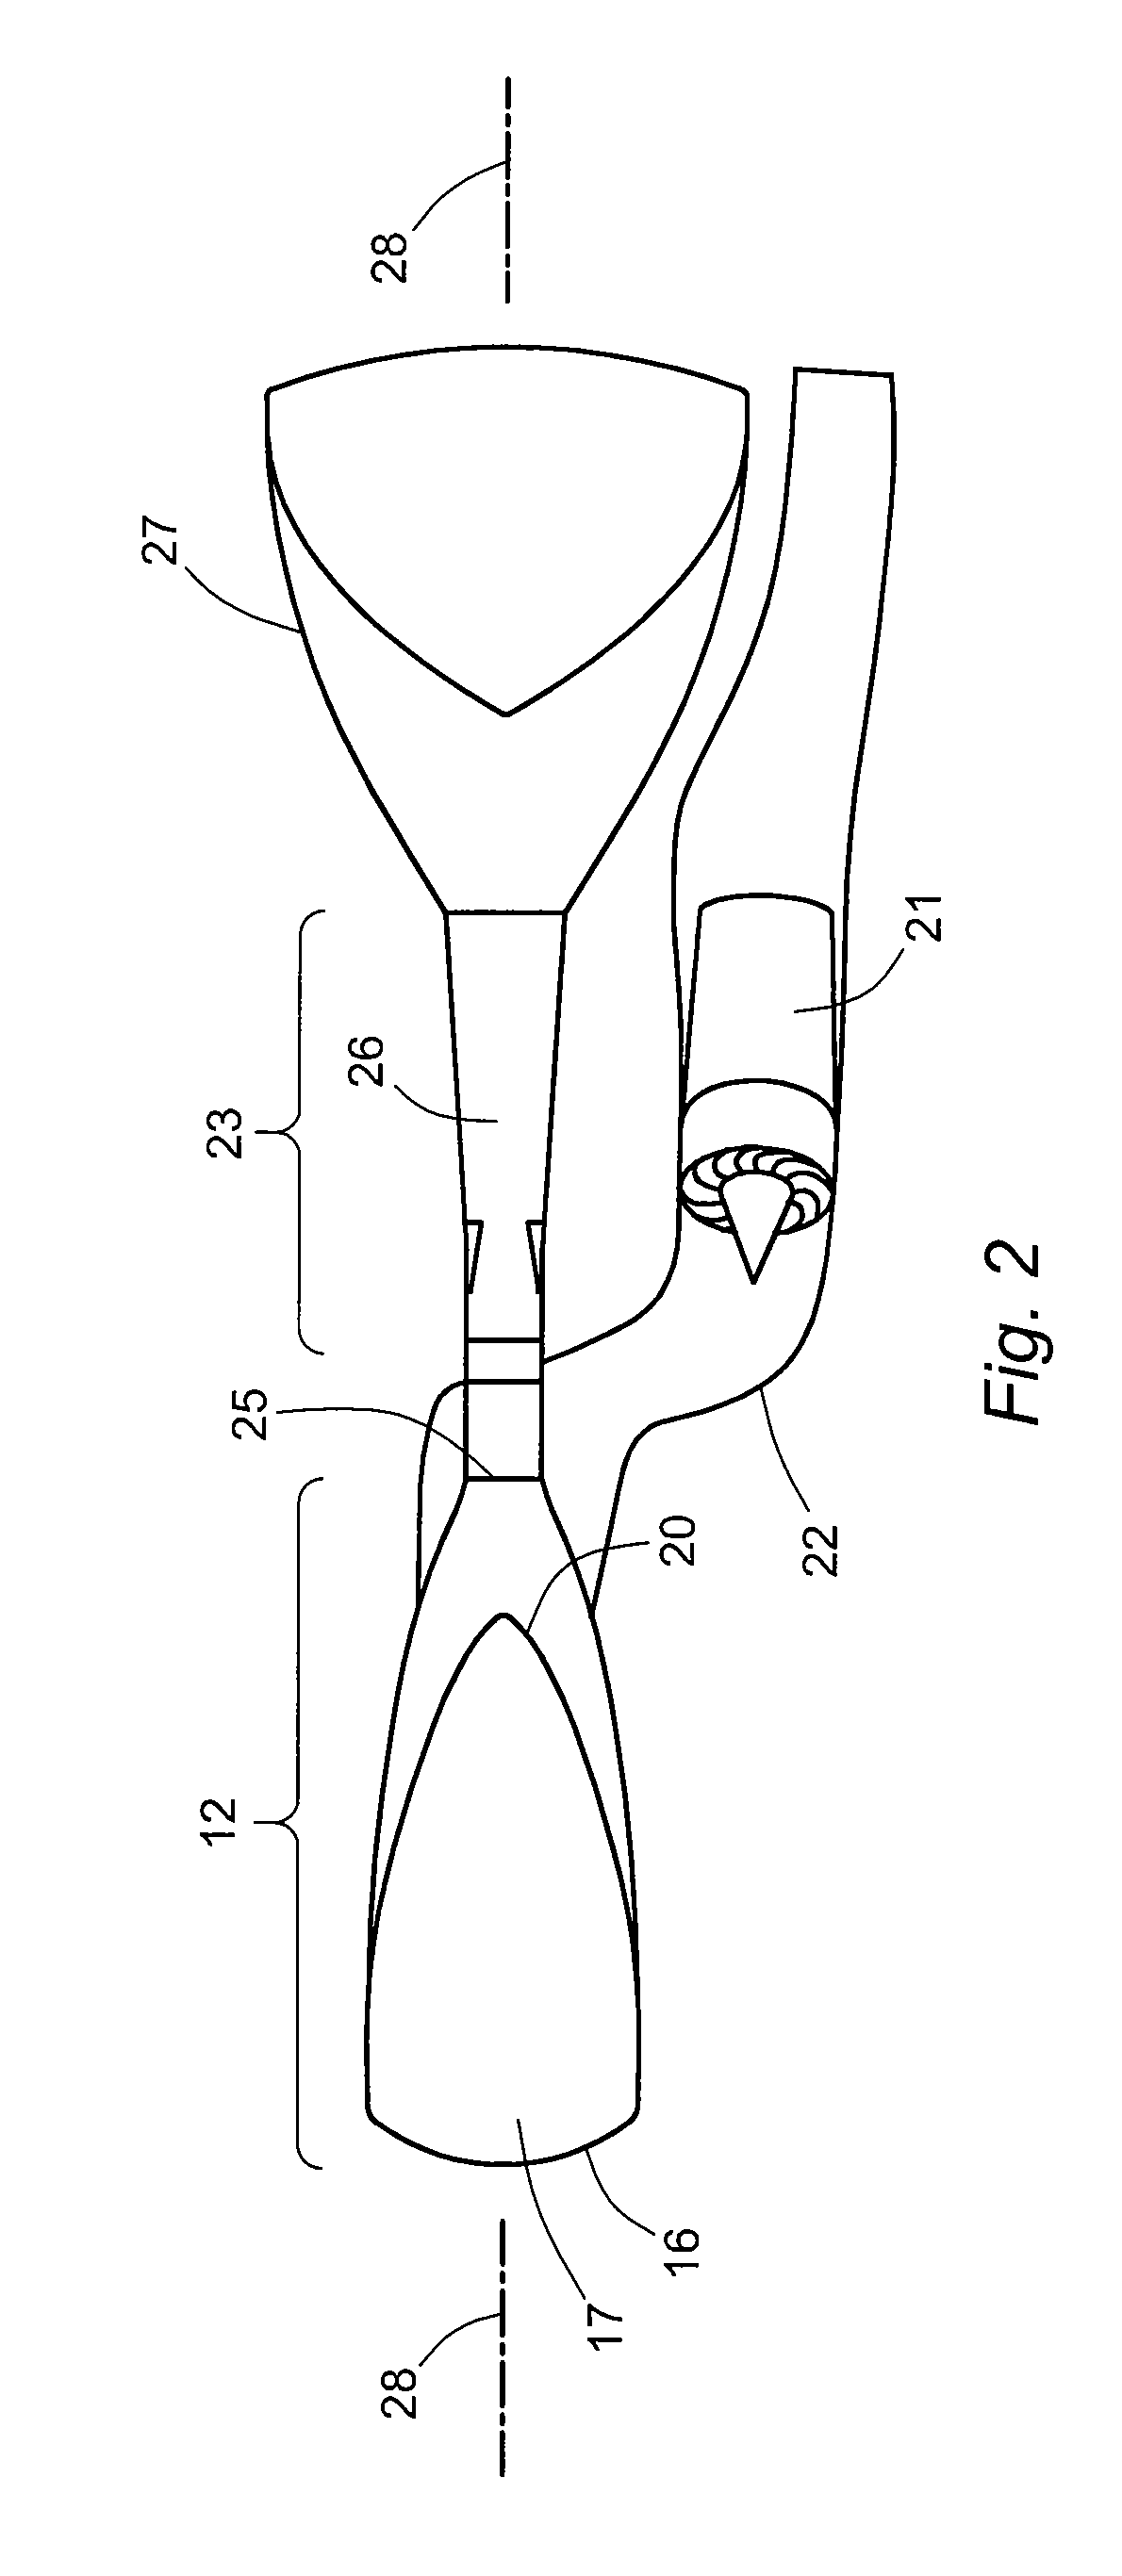 Integrated air inlet system for multi-propulsion aircraft engines